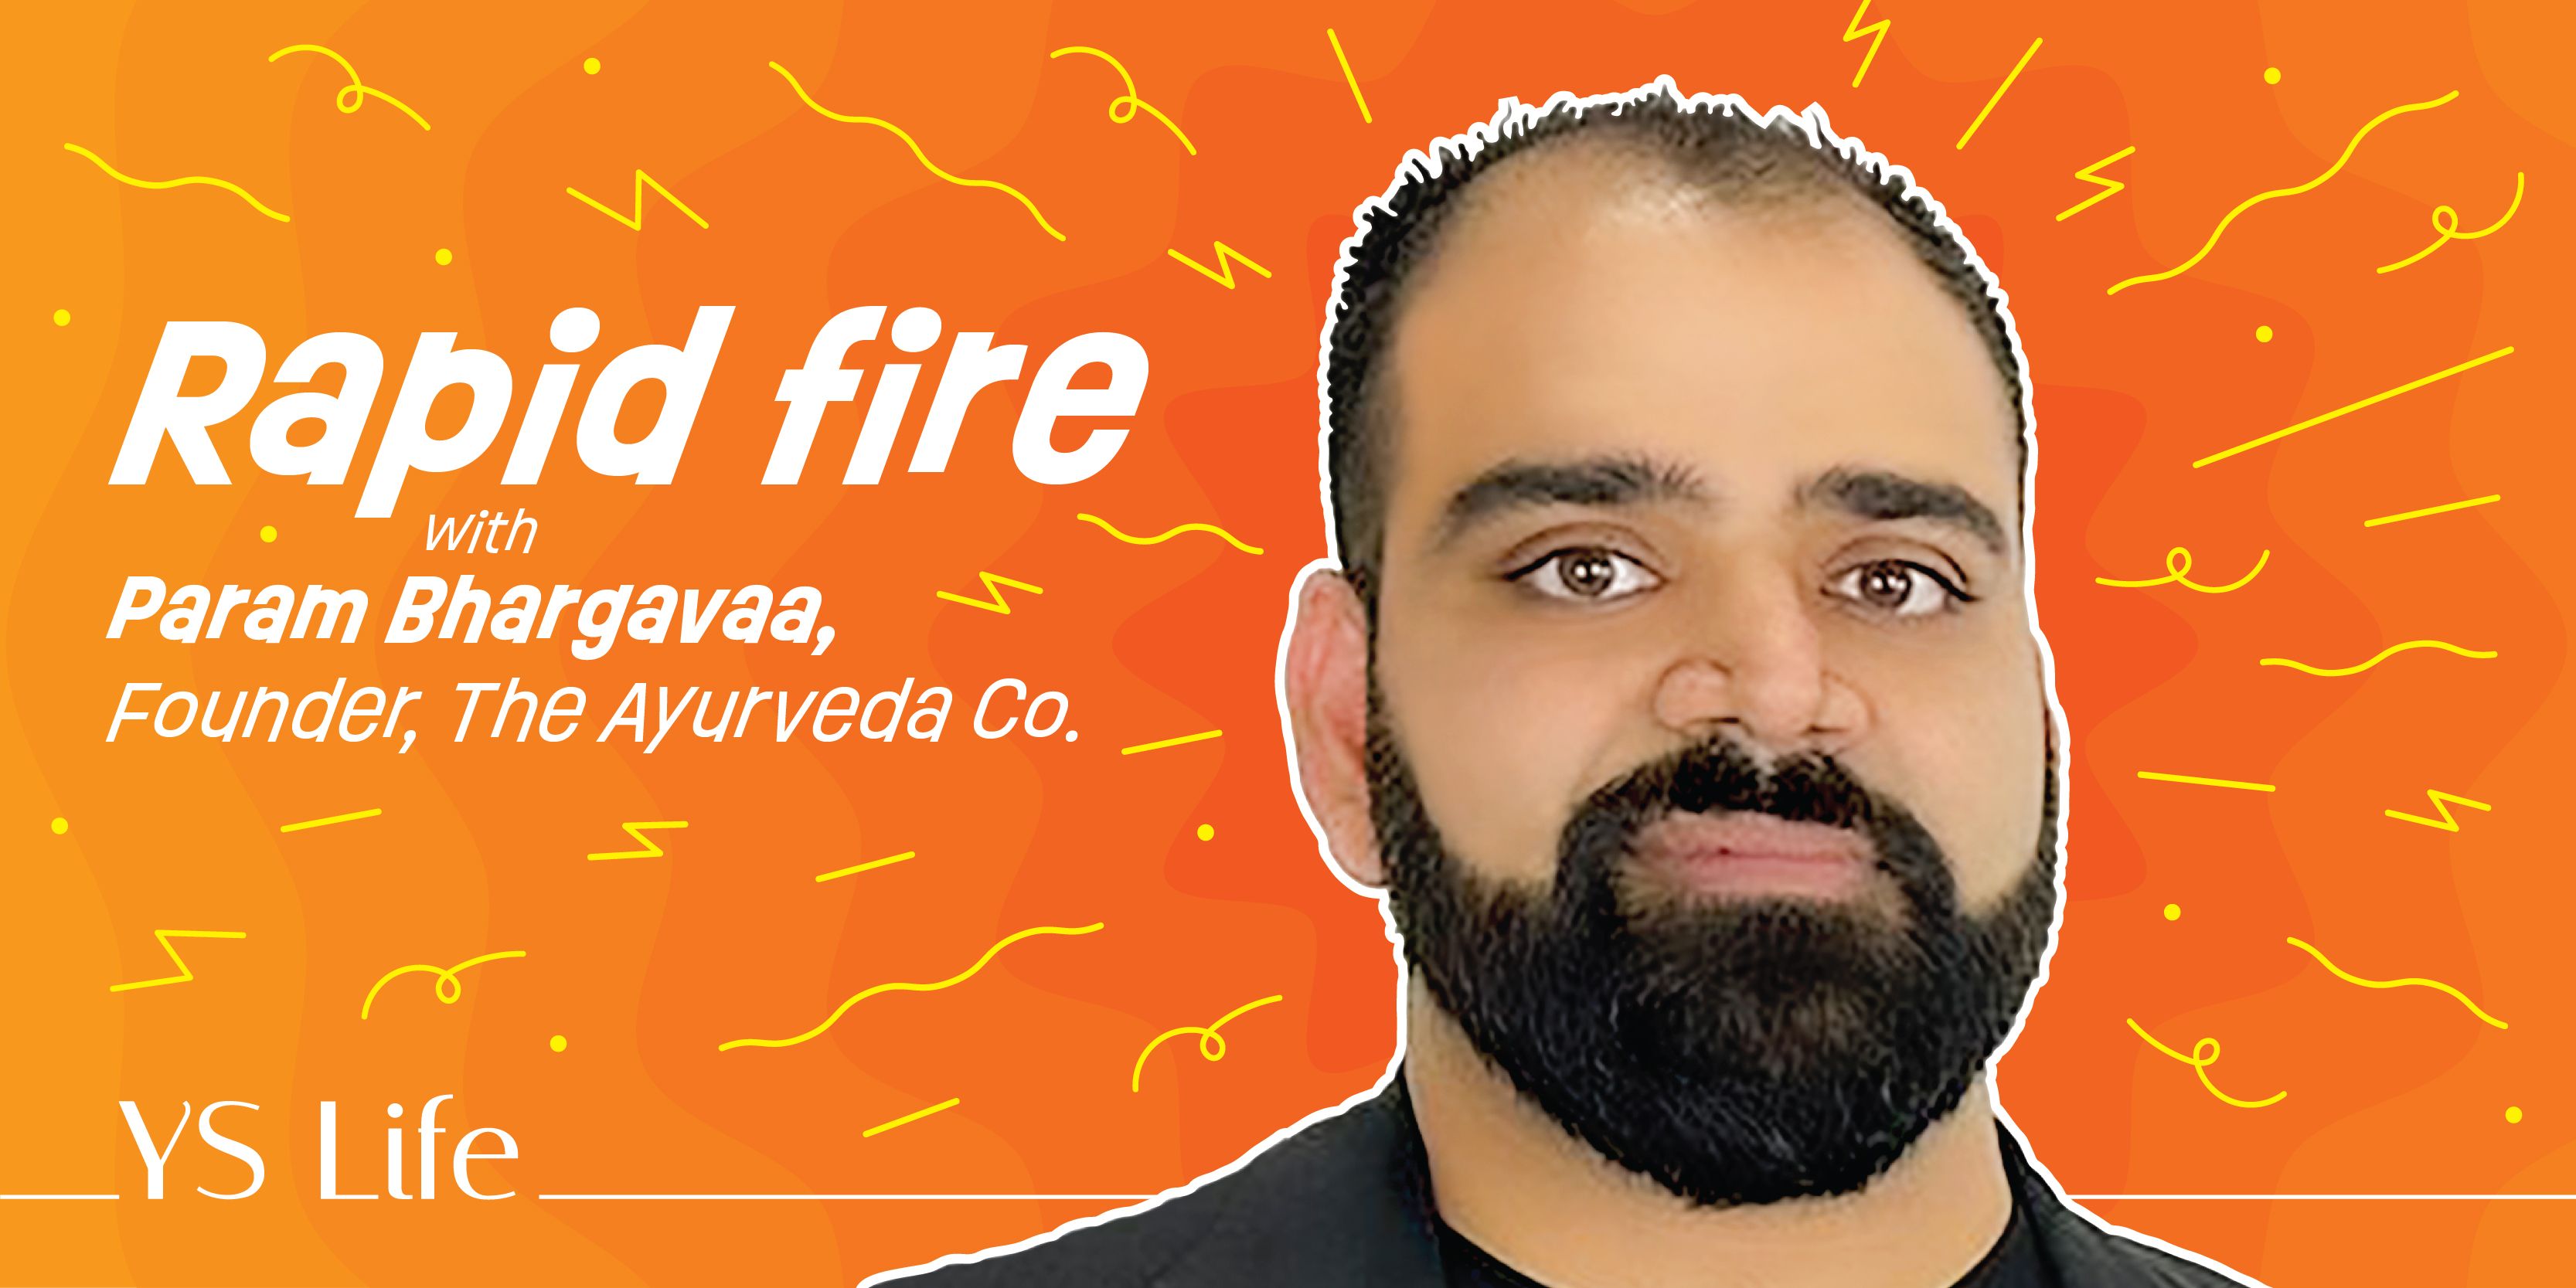 Rapid fire with Param Bhargava, Co-founder of The Ayurveda Company 